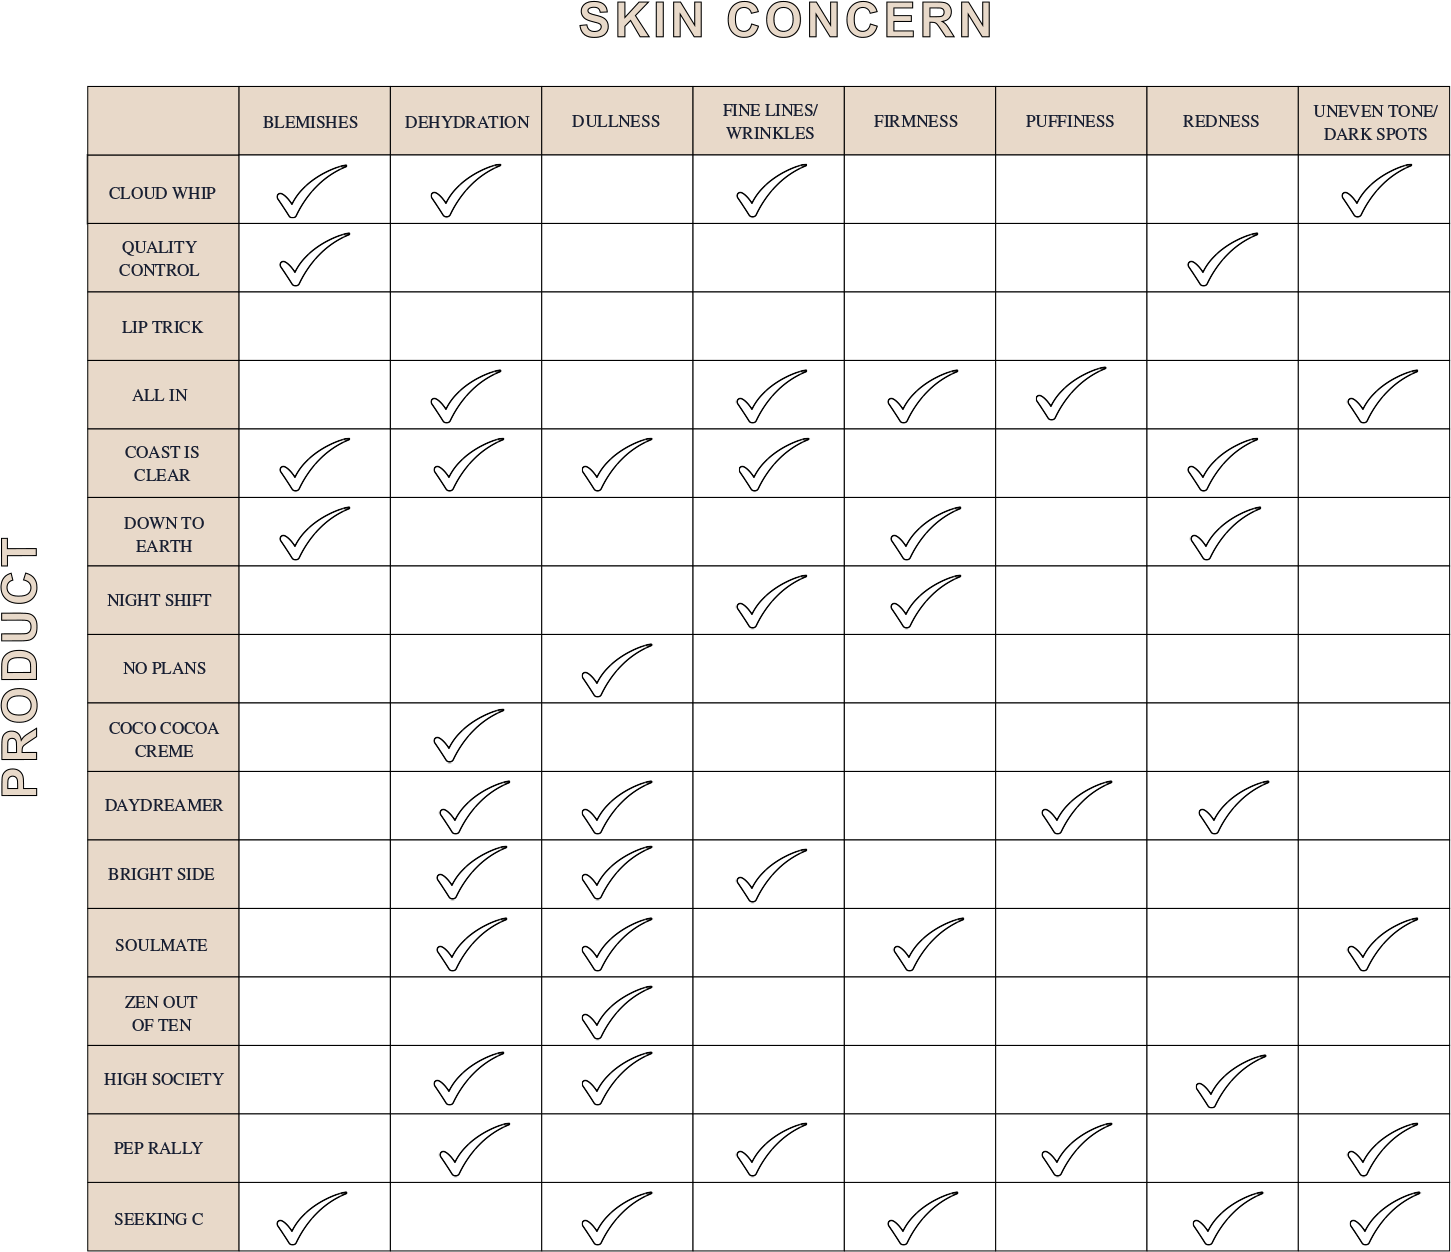 Product and skin concern grid